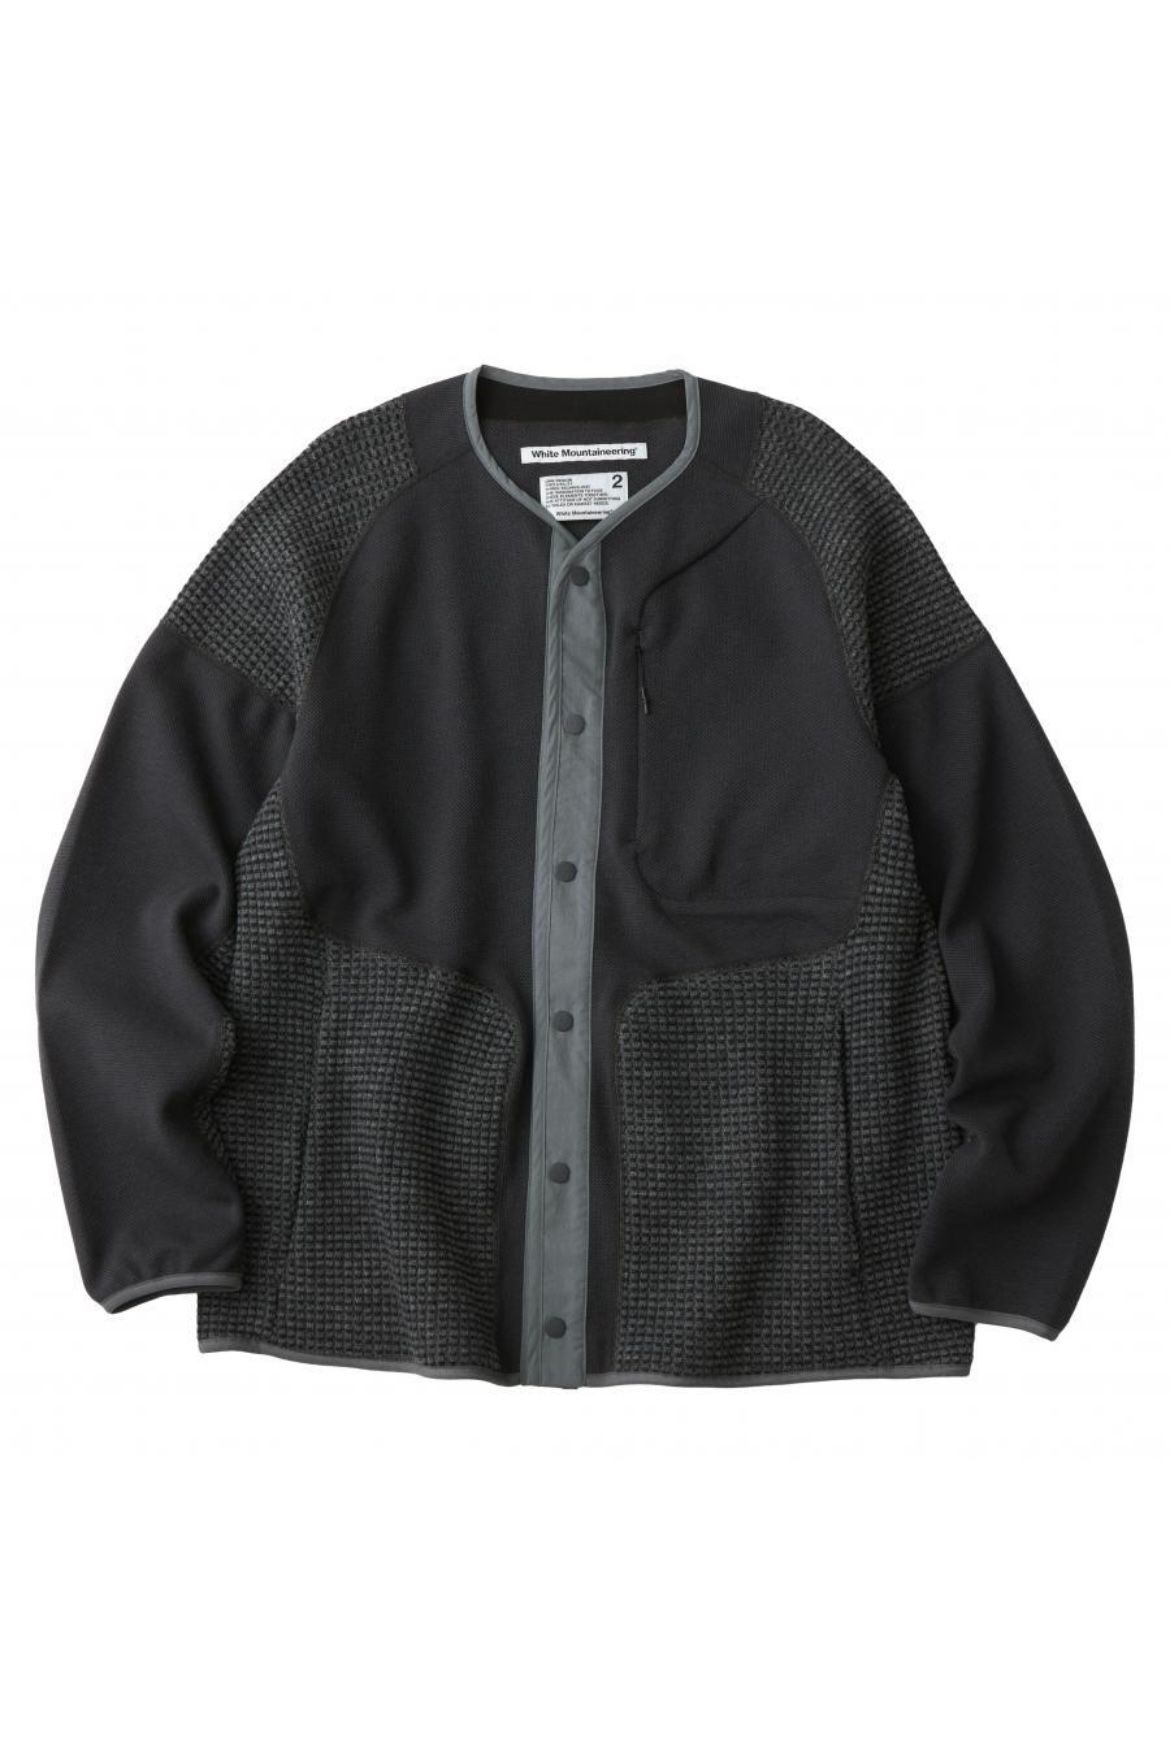 White Mountaineering - patch work blouson -charcoal- 23aw men